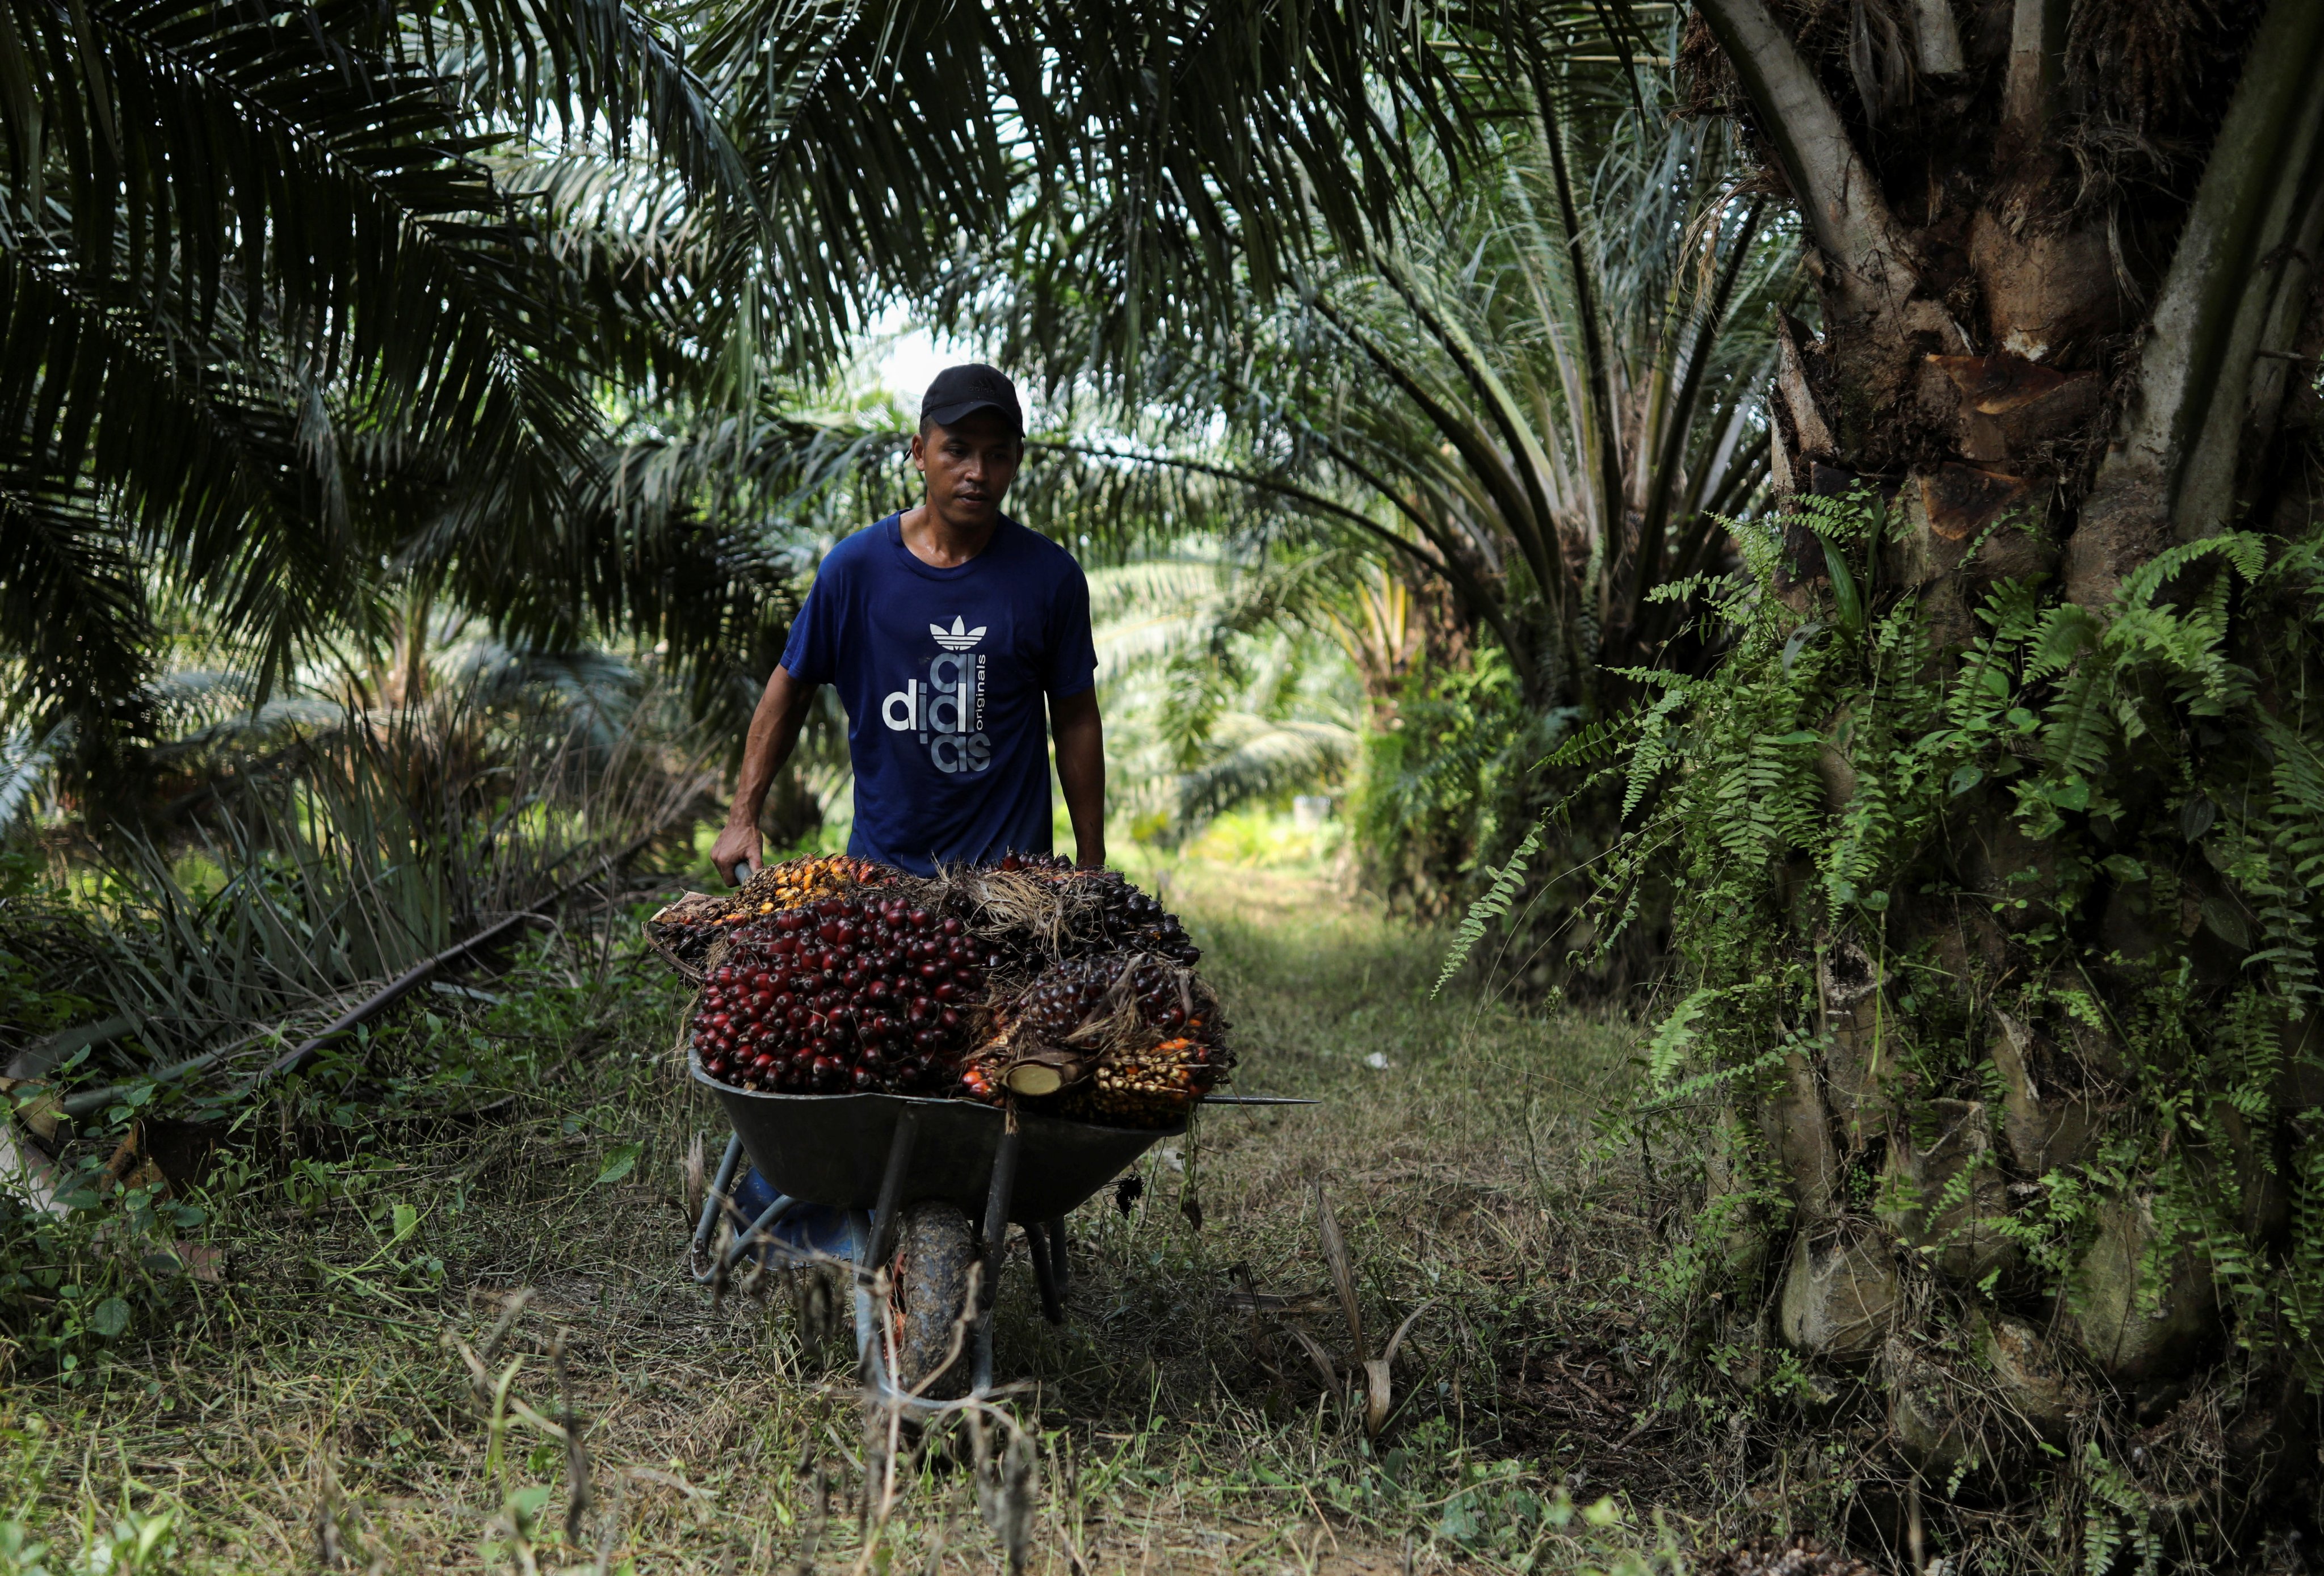 A migrant worker collects bunches of palm oil fresh fruit in Selangor in June 2022. Photo: Reuters